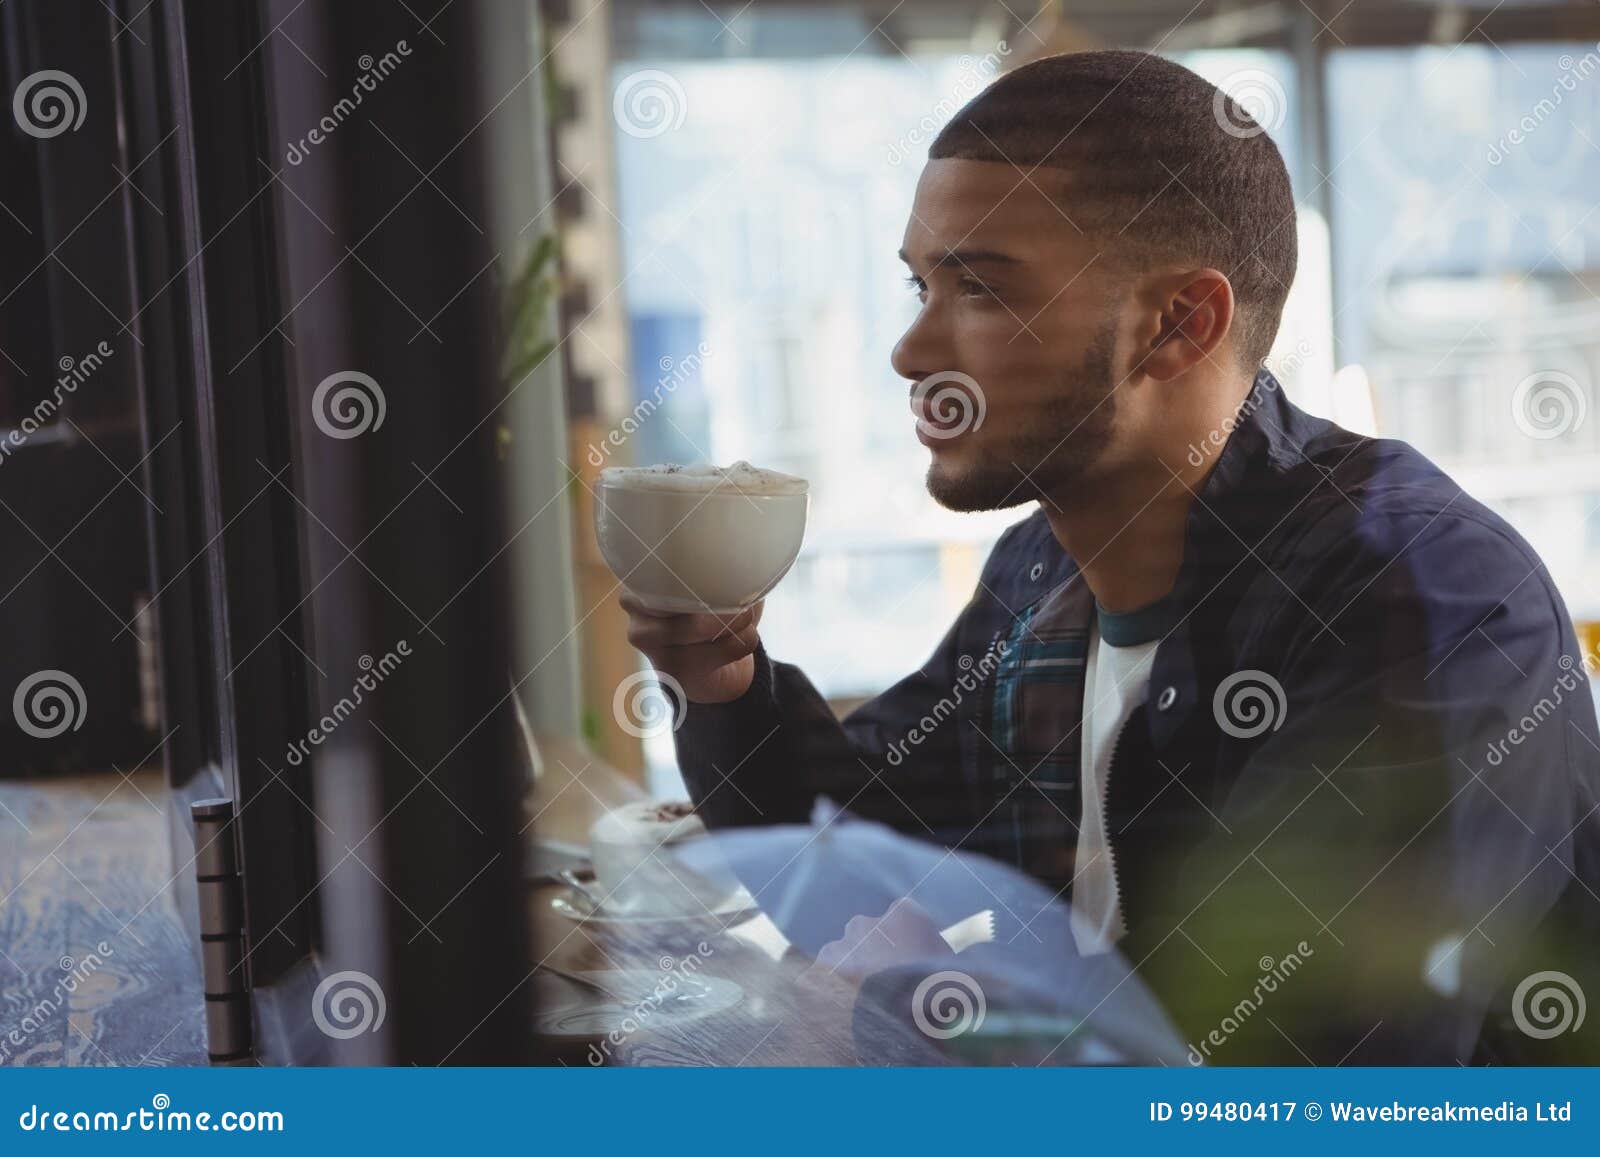 Thoughtful Young Man Having Coffee In Cafe Stock Image - Image of away ...
